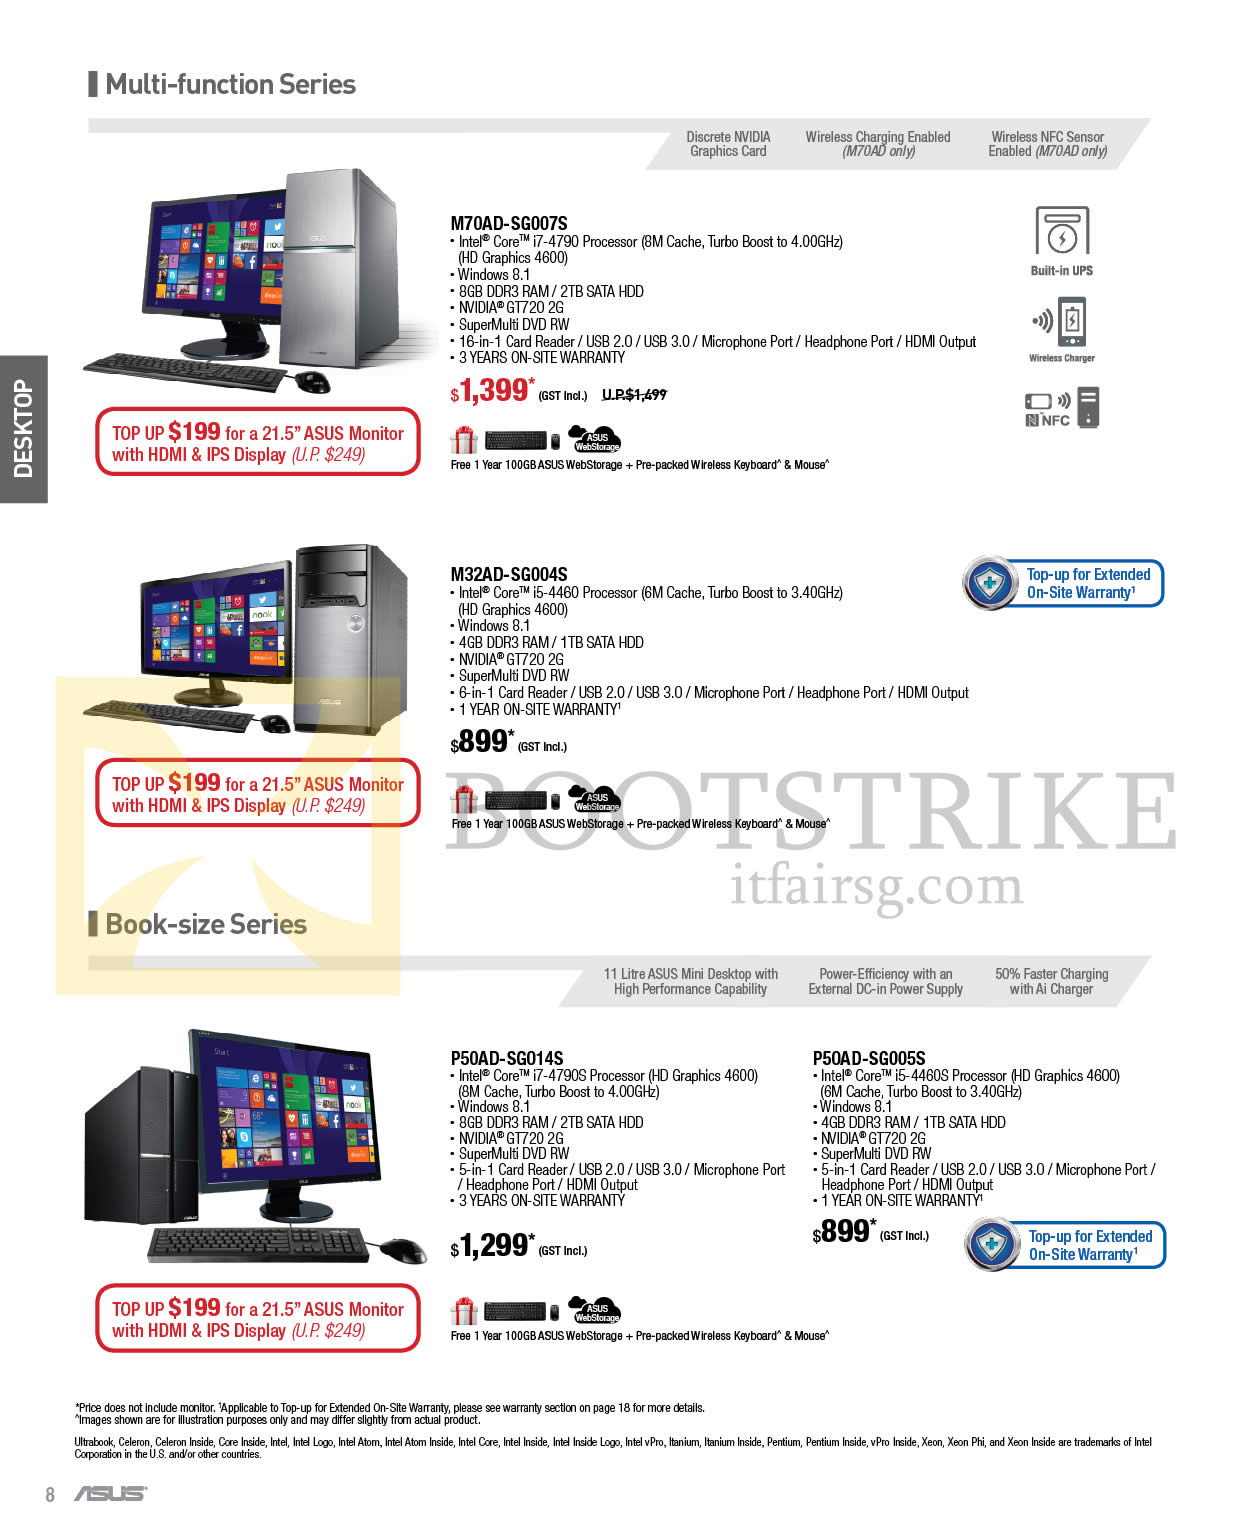 IT SHOW 2015 price list image brochure of ASUS Desktop PCs M70AD-SG007S, M32AD-SG004S, P50AD-SG014S, P50AD-SG005S